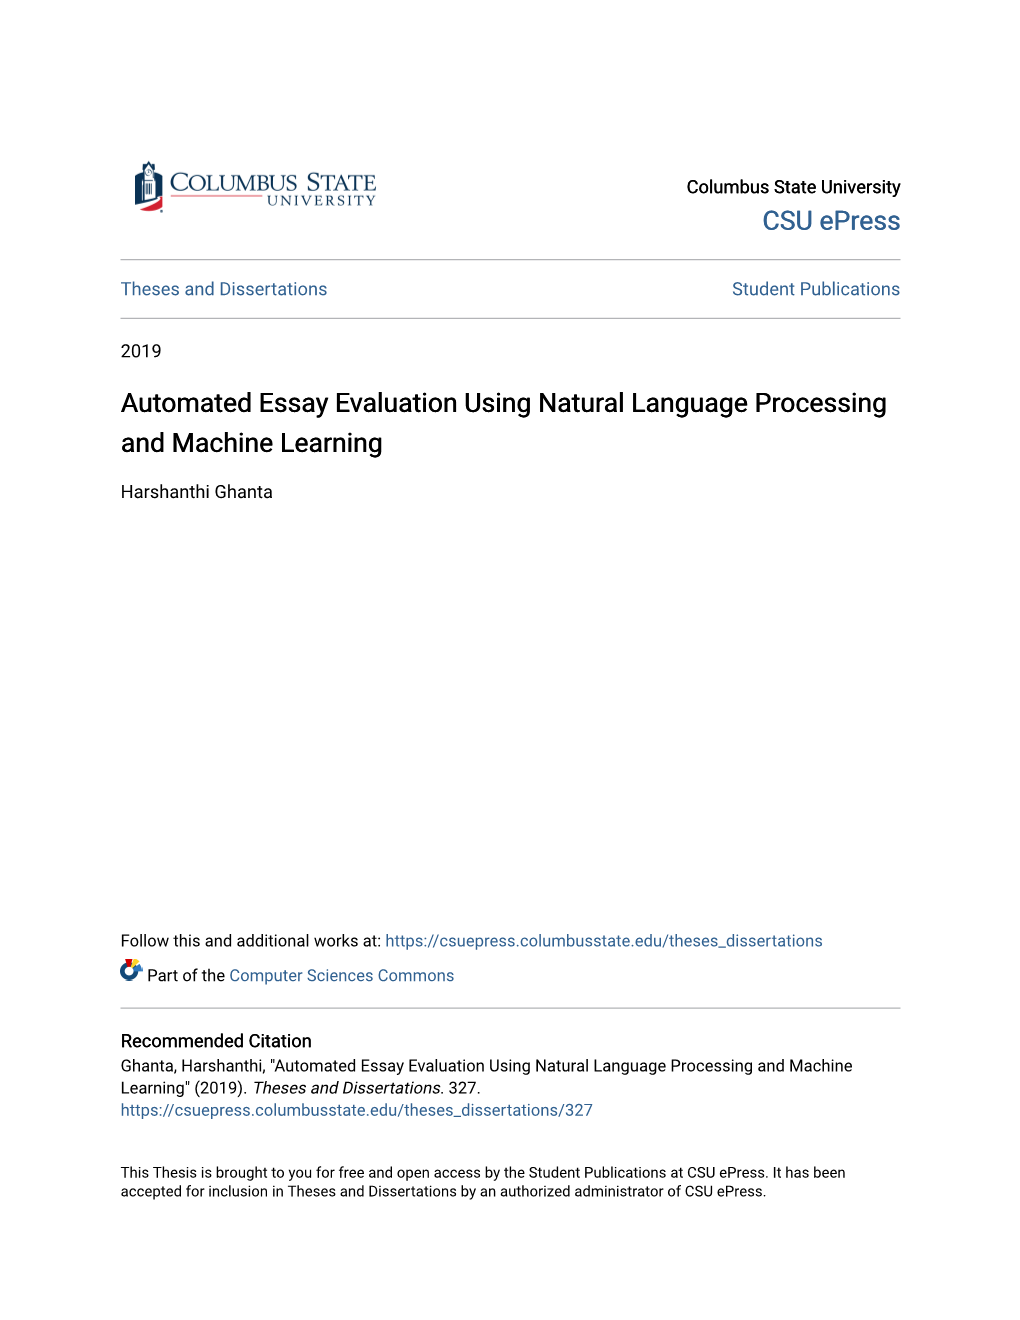 Automated Essay Evaluation Using Natural Language Processing and Machine Learning